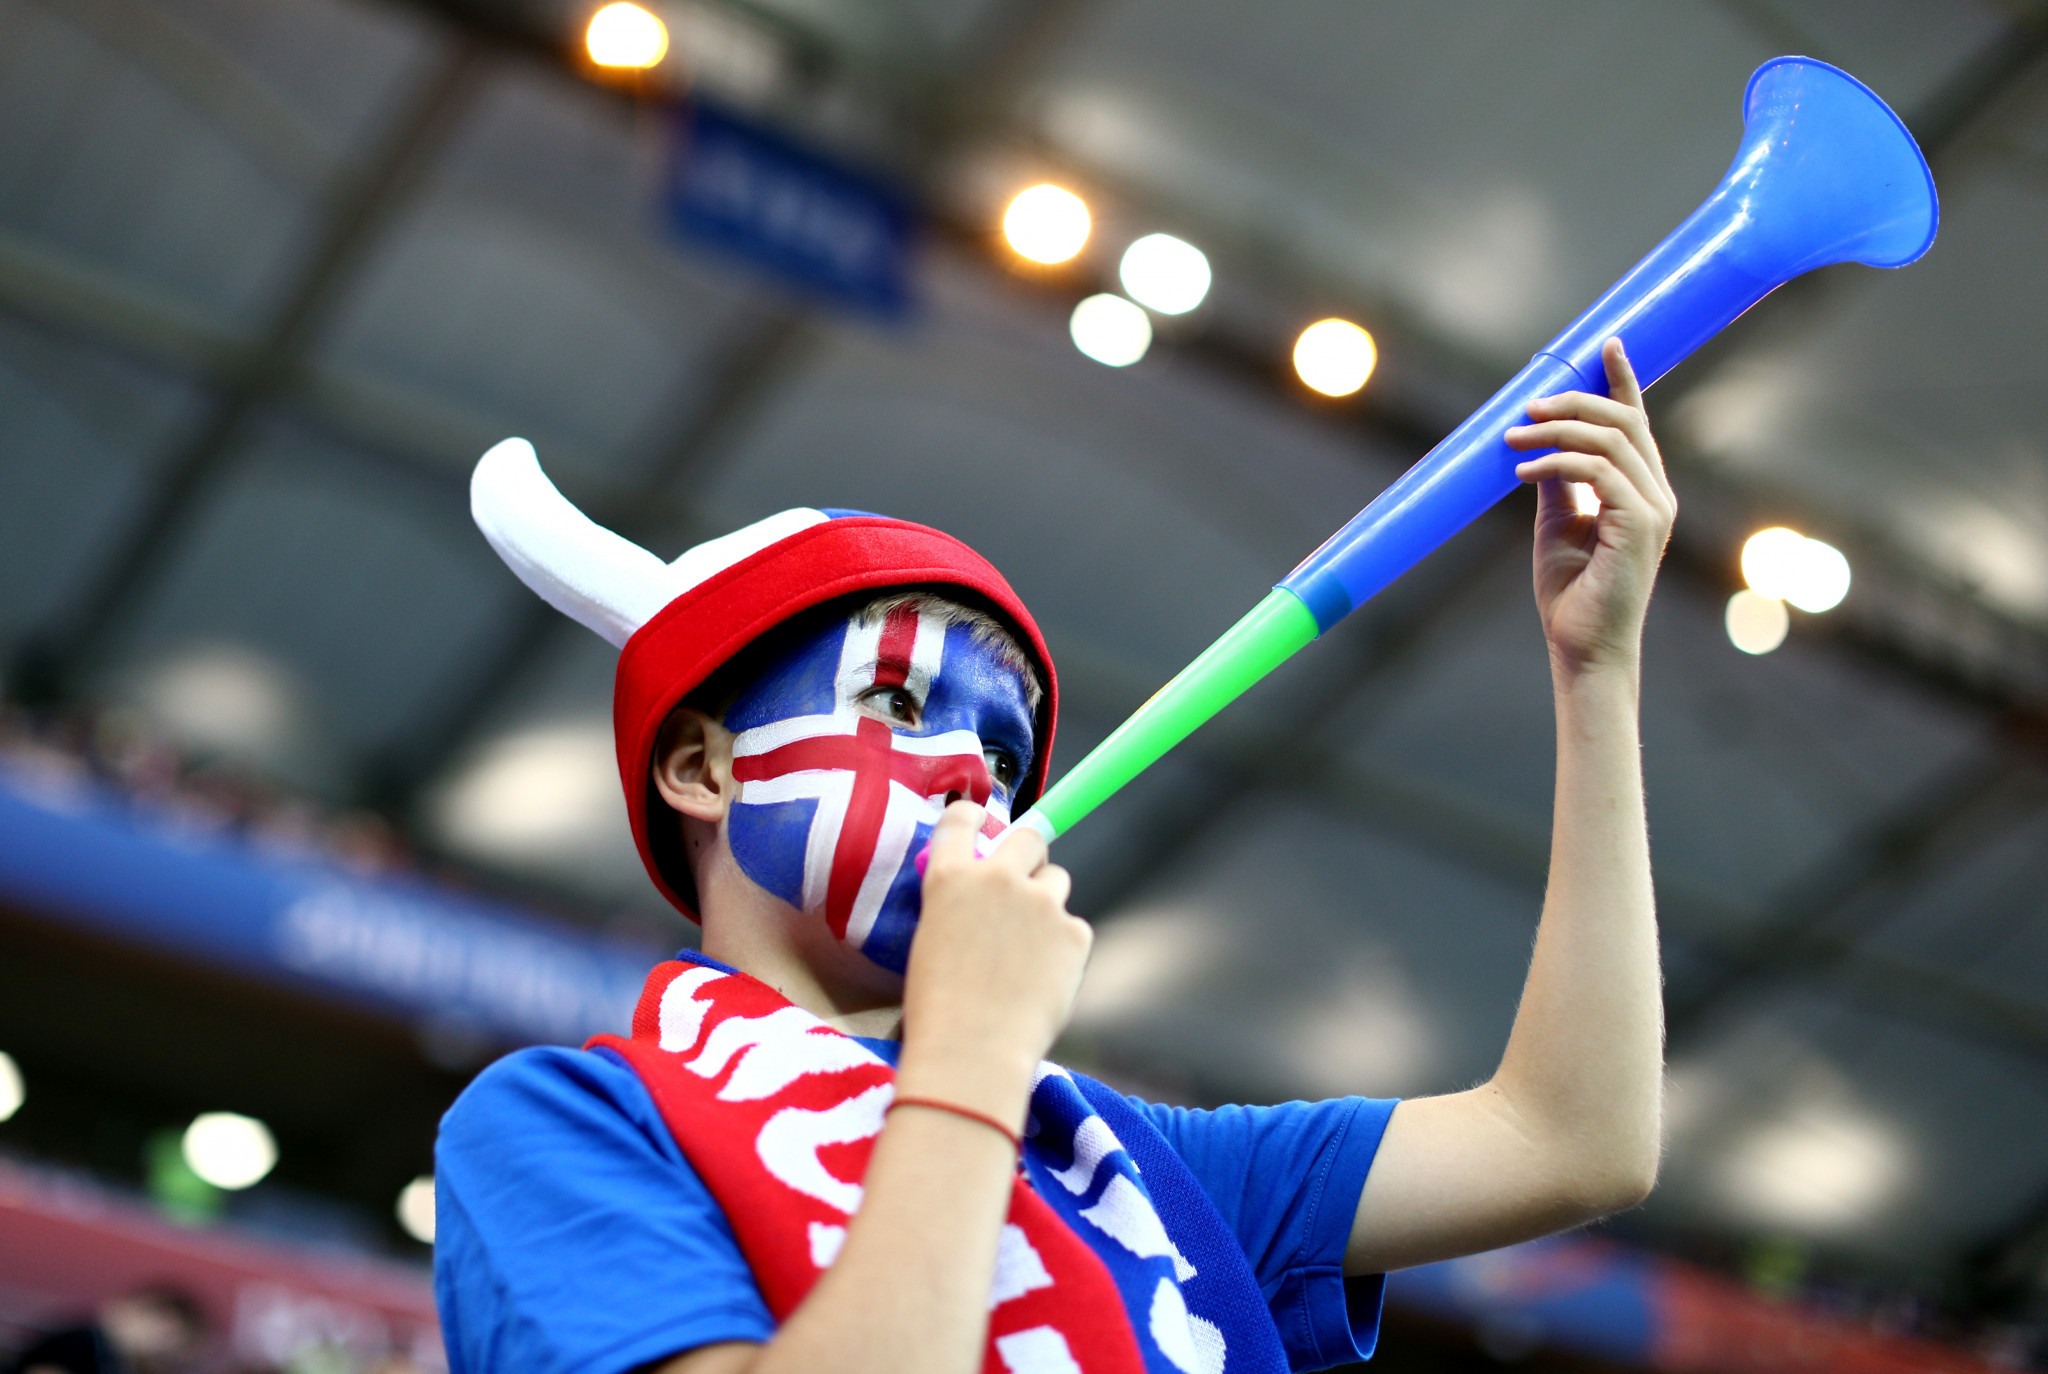 Iceland fans during the match today ©Getty Images